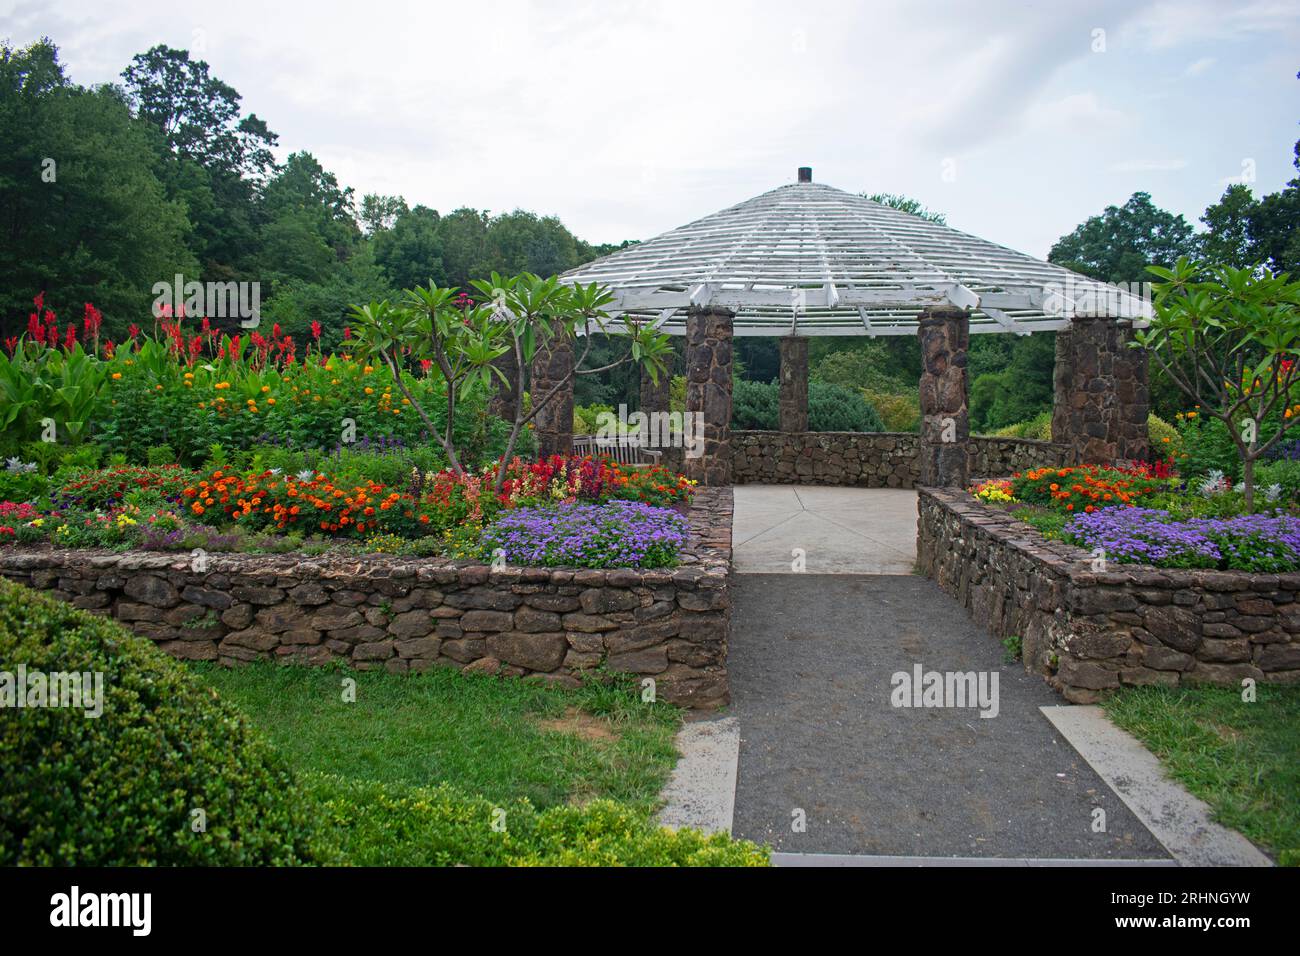 A pretty stone and wood gazebo at the end of a flower bed in a local garden park -15 Stock Photo